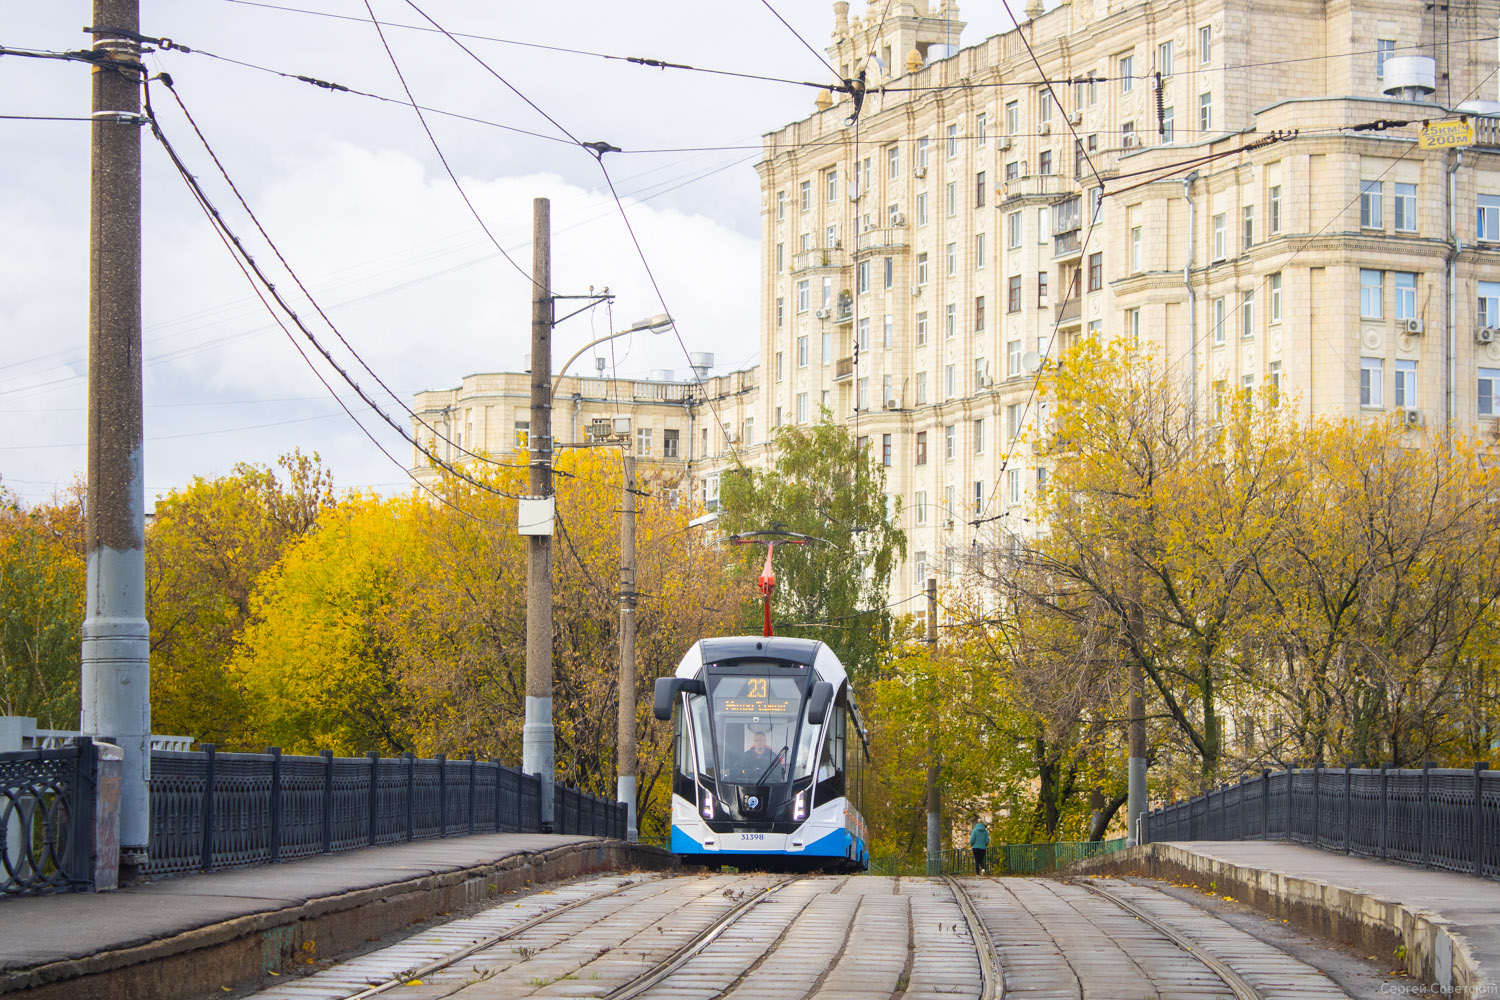 Moscou — Tram lines: Northern Administrative District